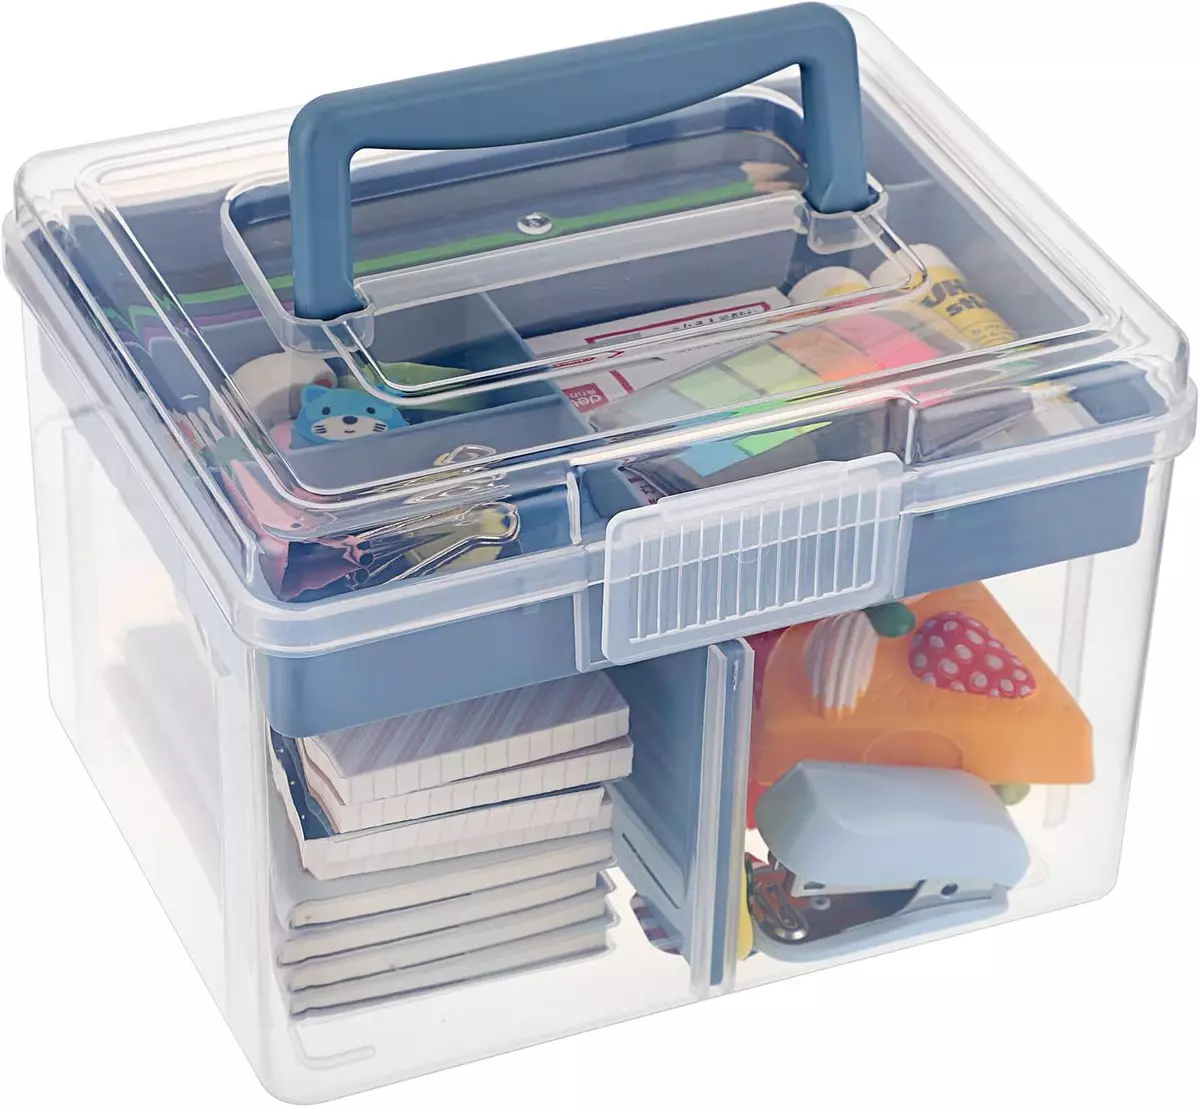 BTSKY 2 Layer Clear Plastic Dividing Storage Box with Removable Small Blue